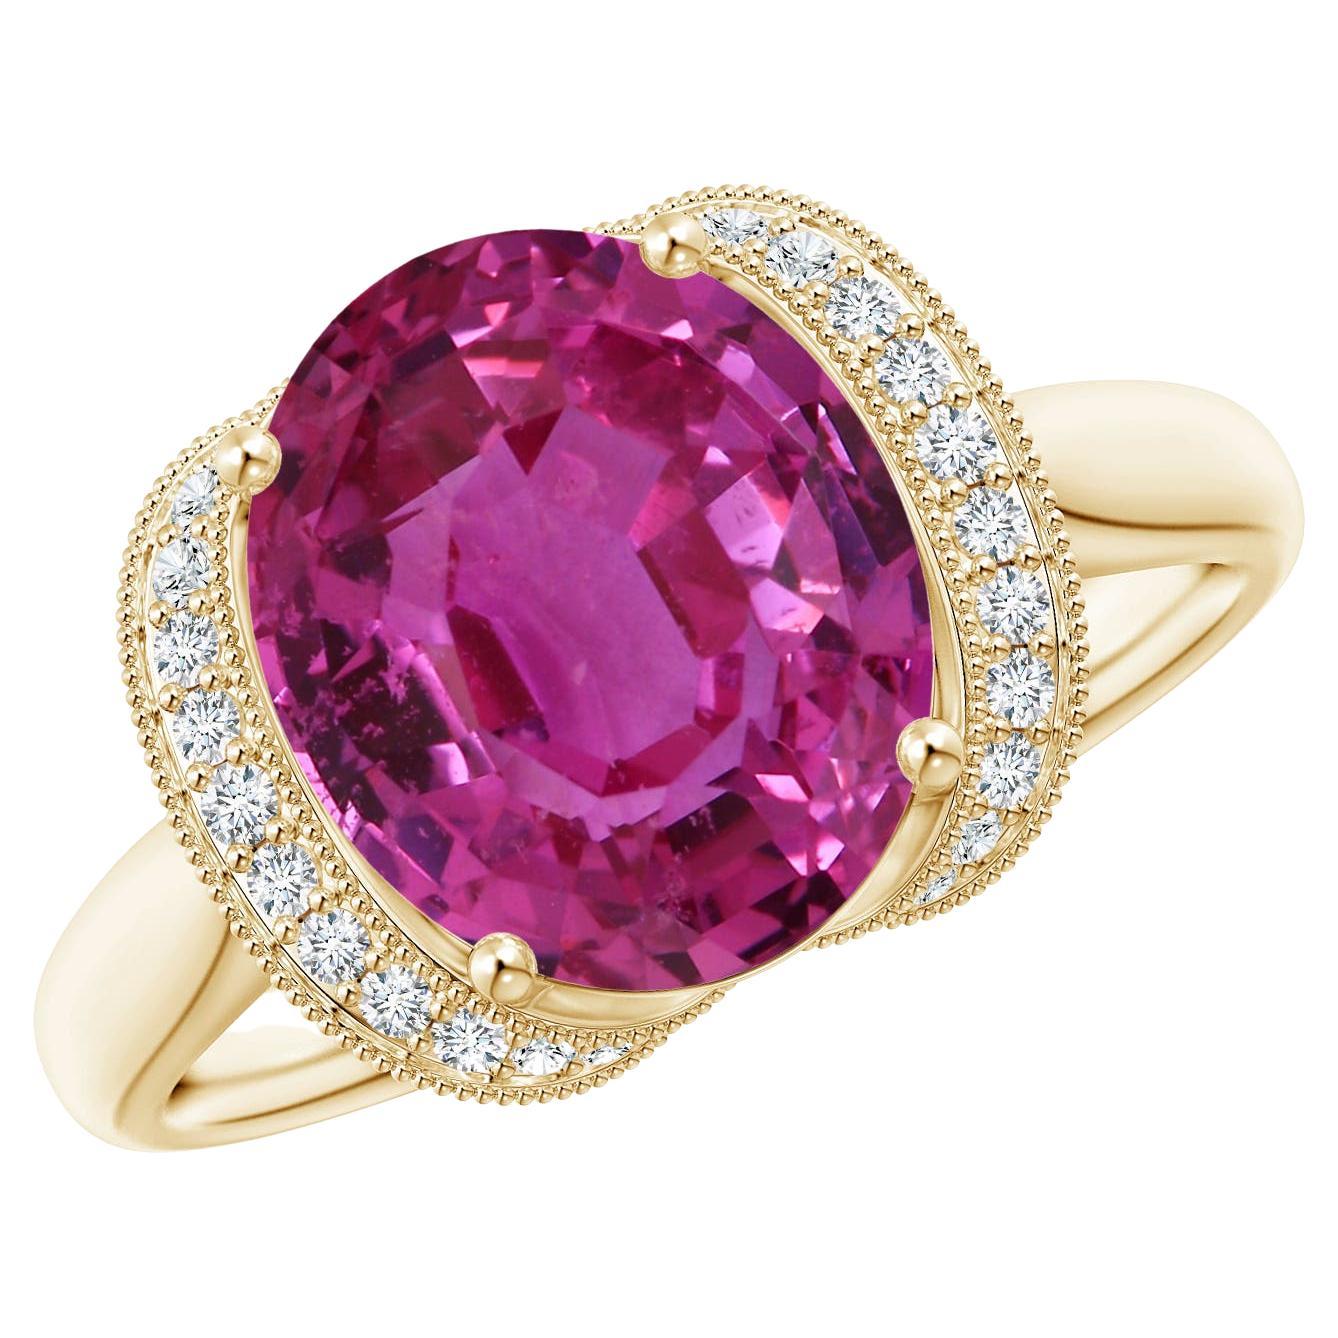 For Sale:  Angara Gia Certified Pink Sapphire Ring in Yellow Gold with Diamond Half Halo